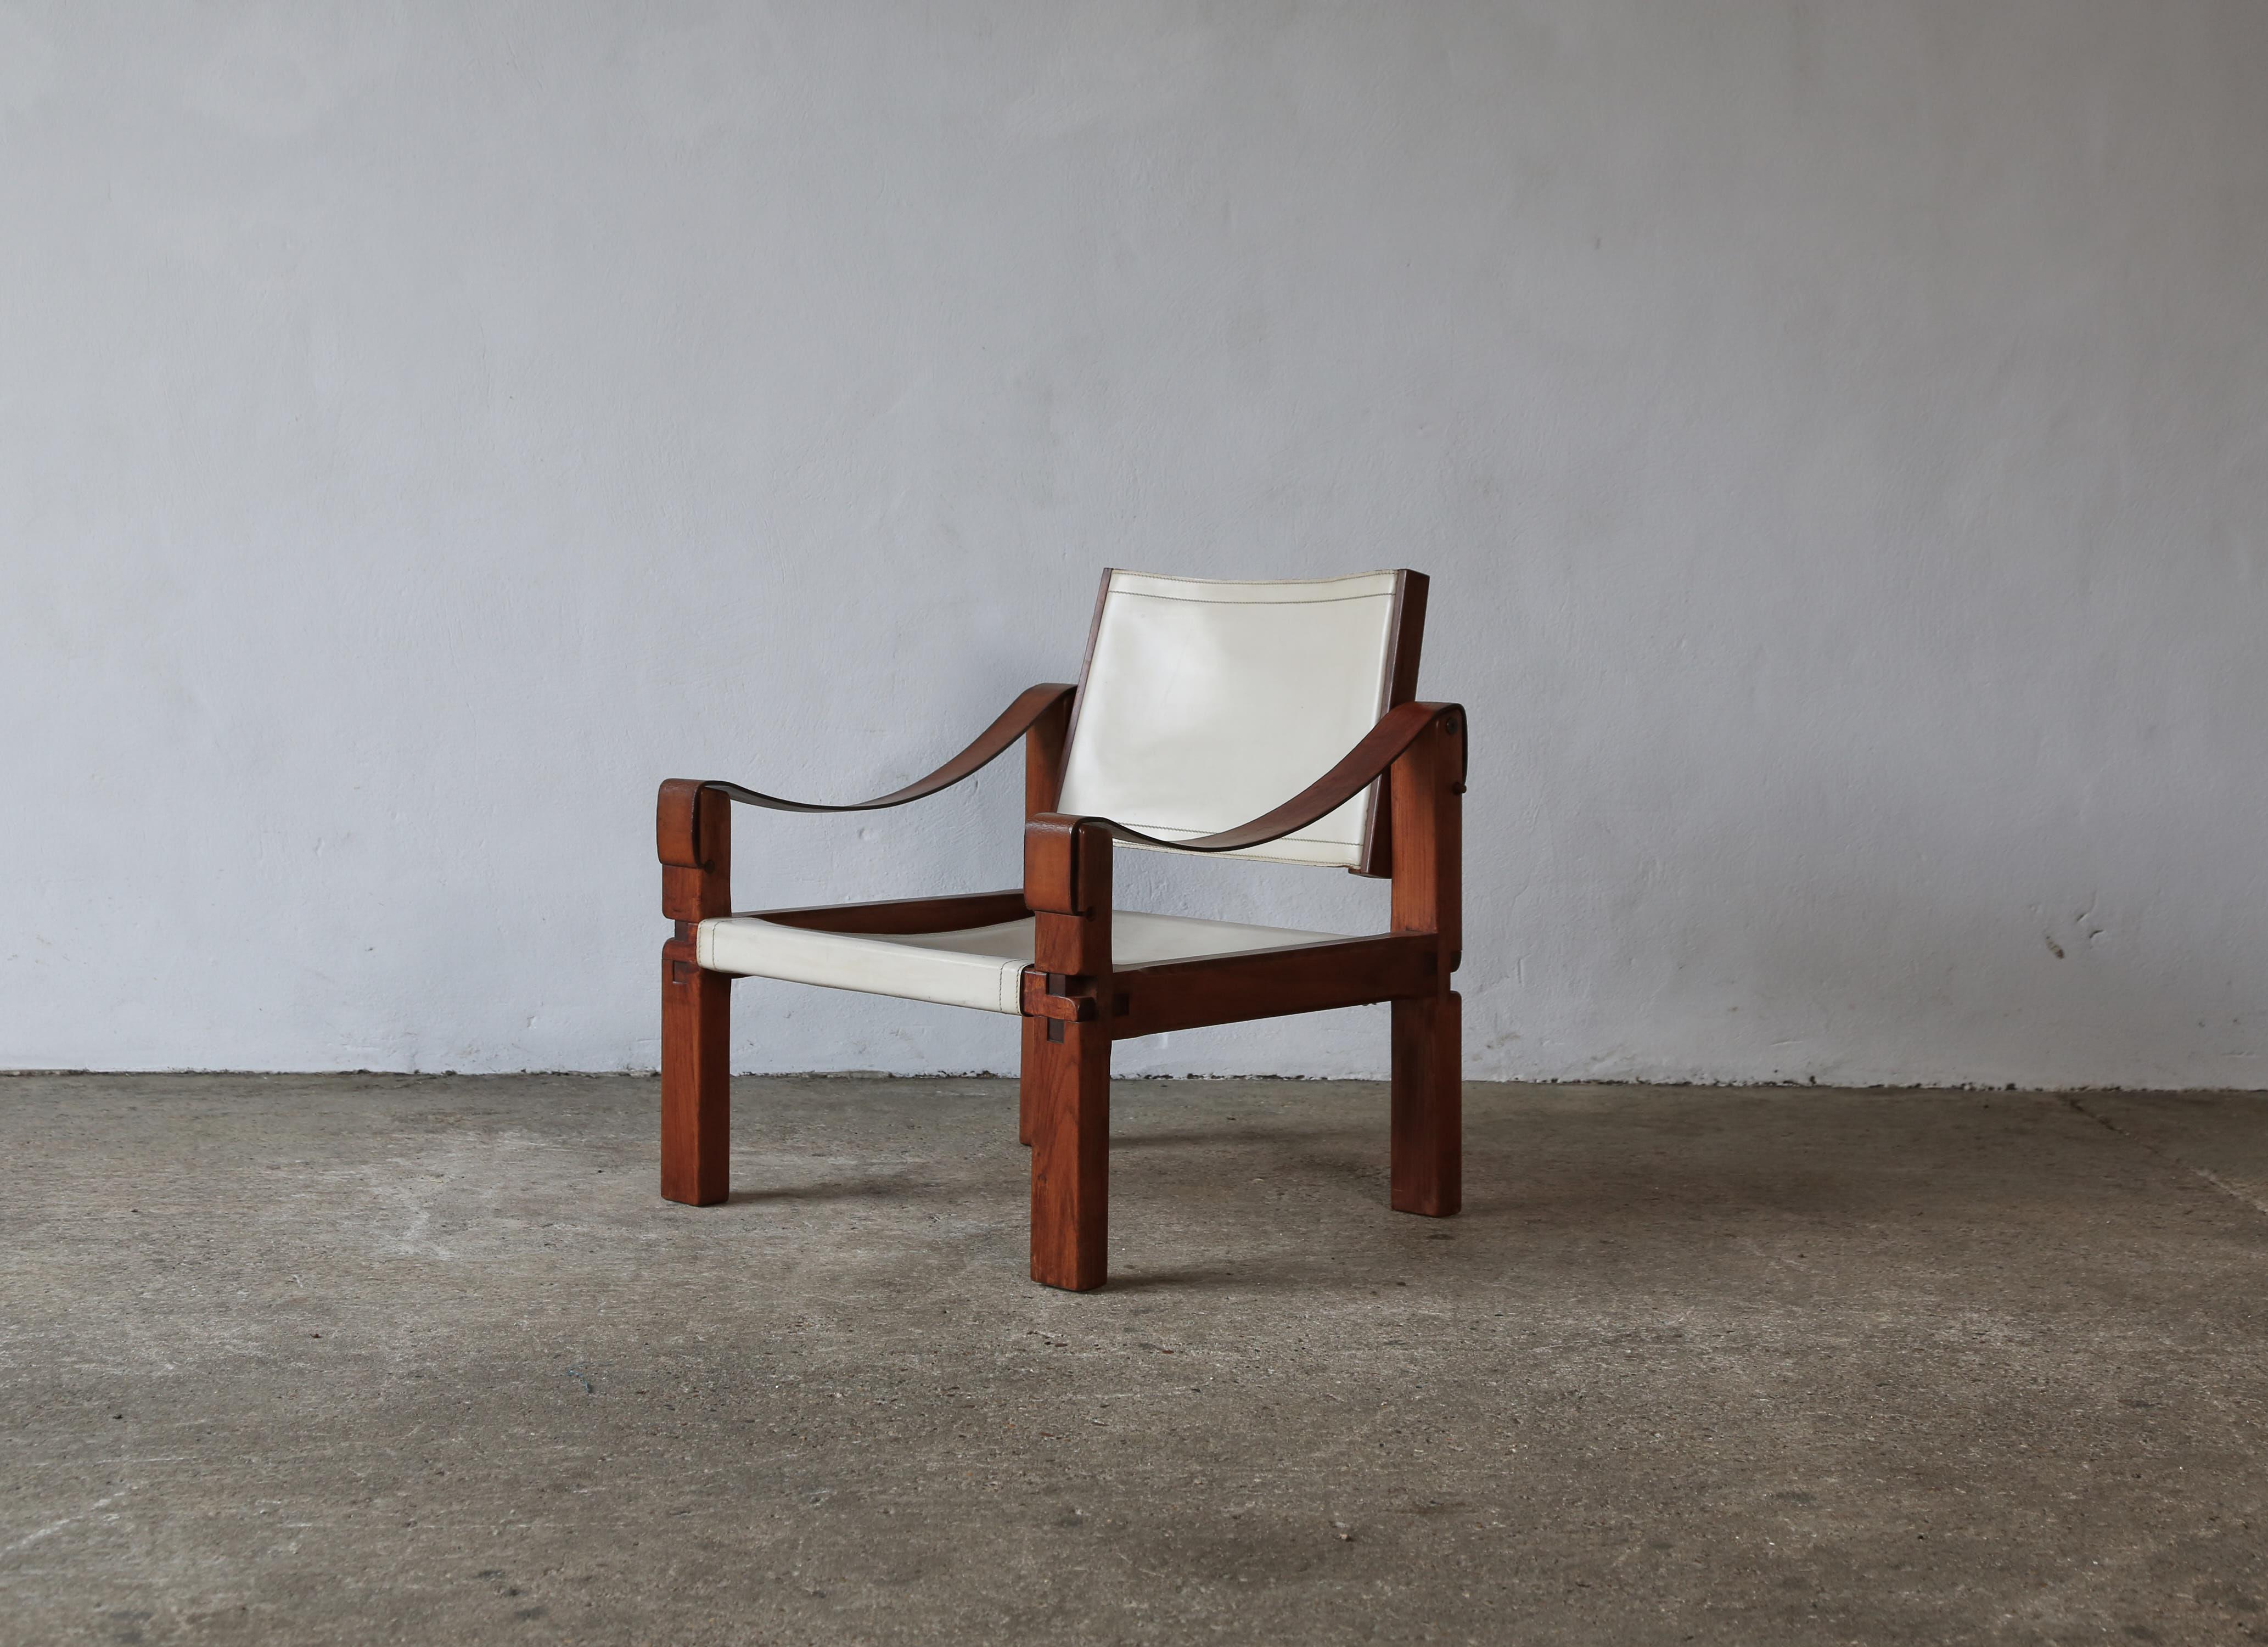 Pierre Chapo S10 chair, France, 1960s. Elm, leather, off-white leather. Wood frame re-finished at some point in the past. Fast shipping worldwide.
